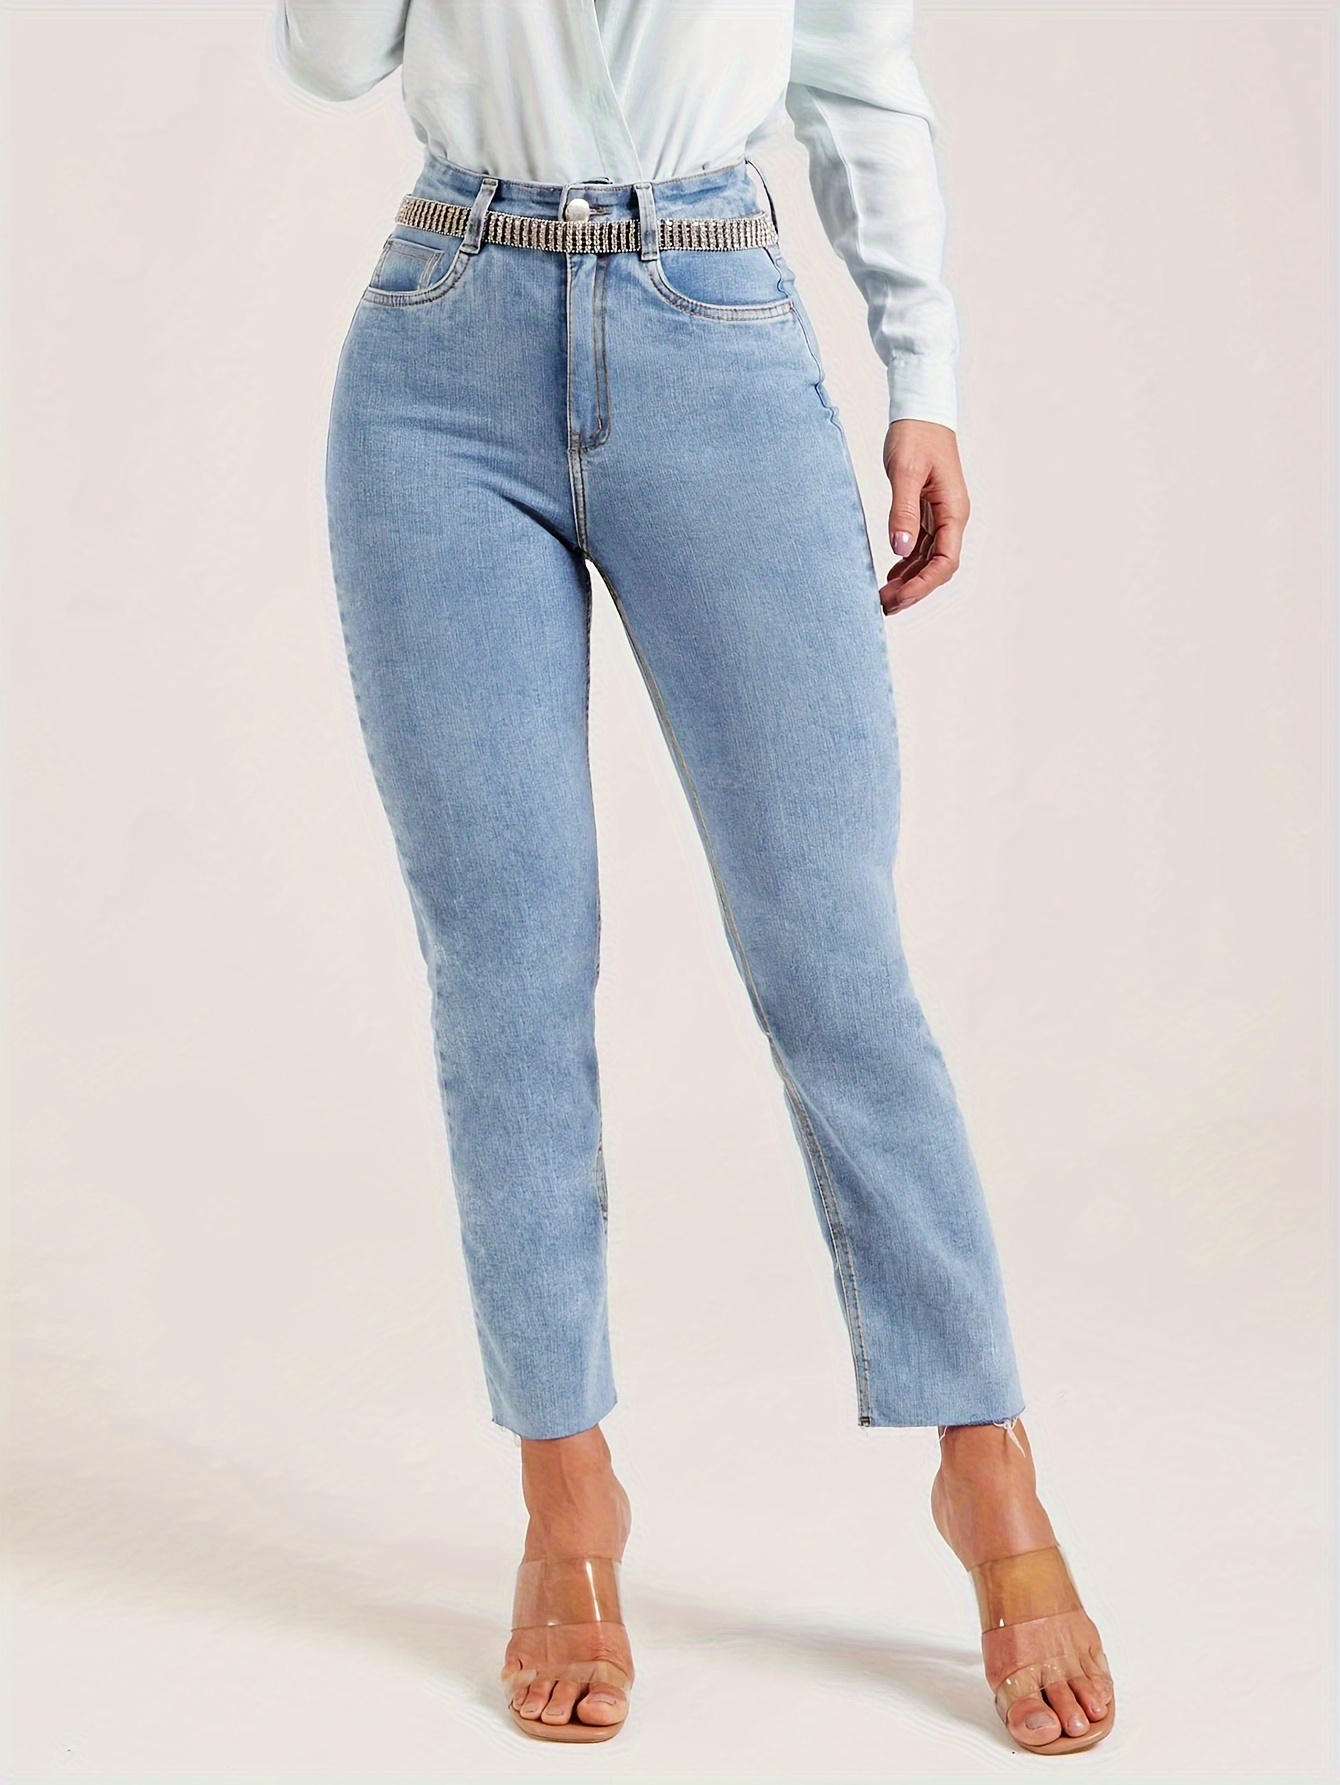 TIORU Jeans for Women Pants Women's Jeans Pants for wome High Waist Skinny  Cropped Jeans Jeans (Color : Light Wash, Size : XX-Small) : :  Clothing, Shoes & Accessories